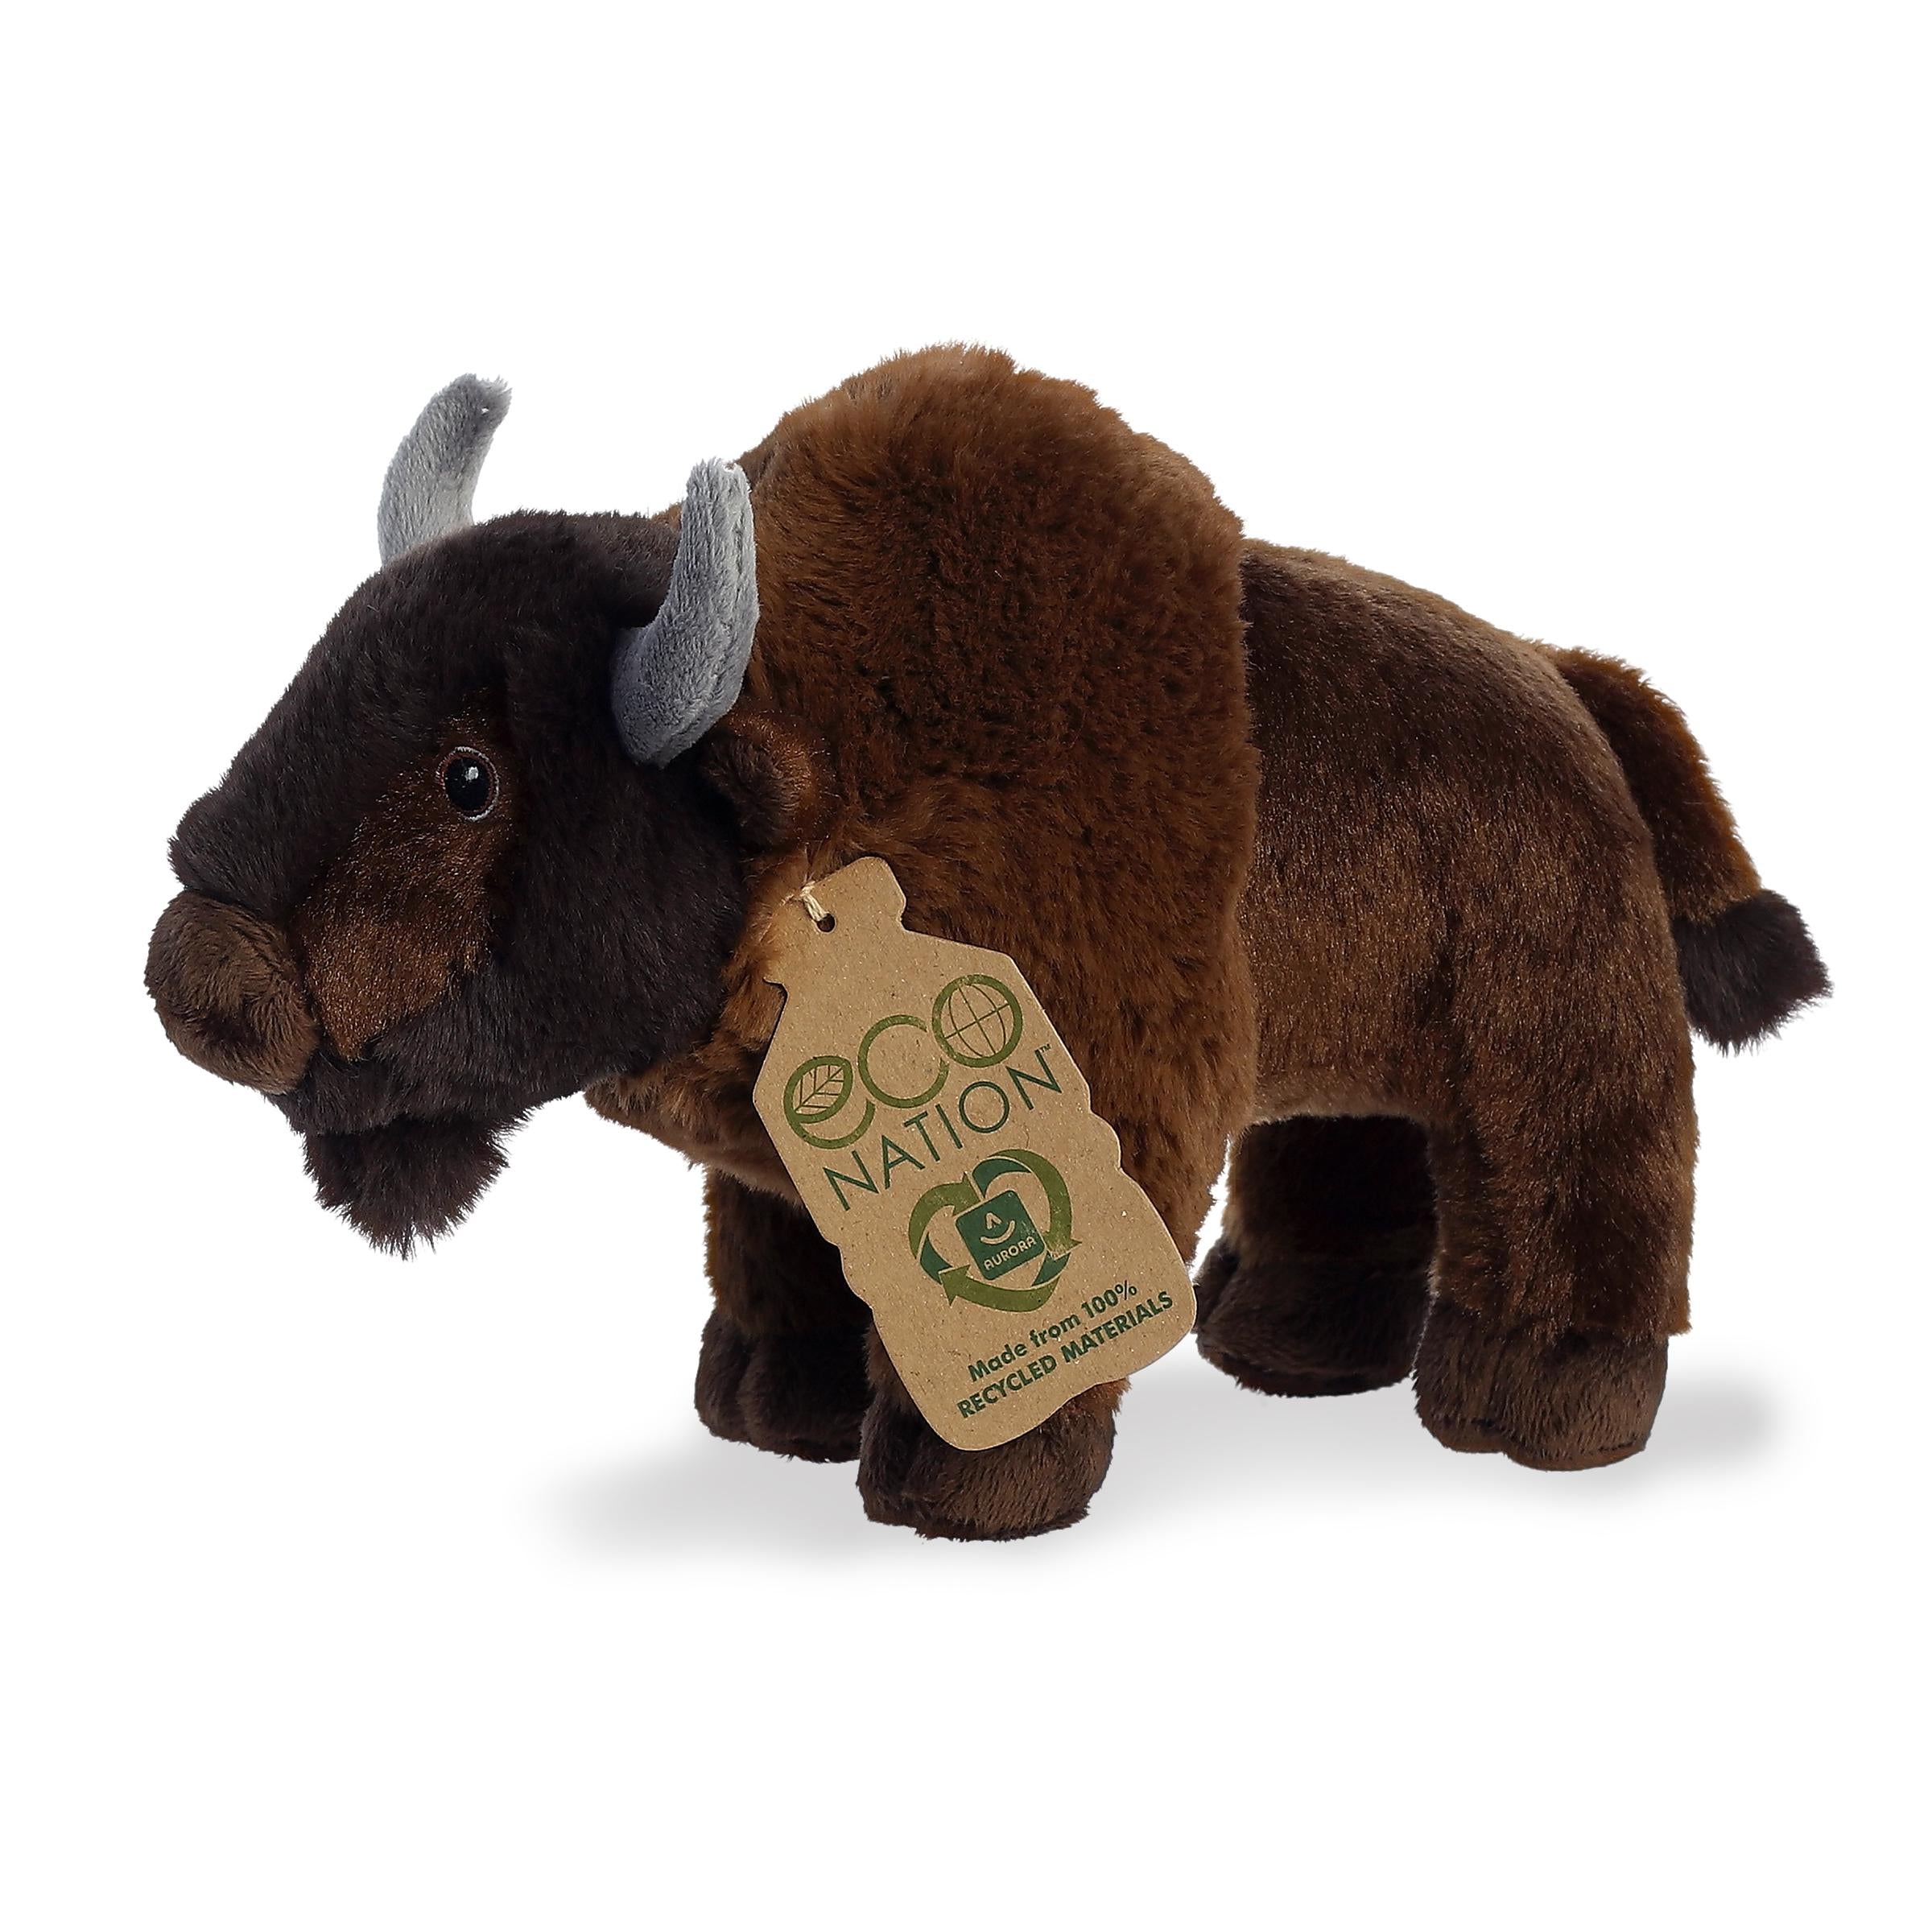 Charming bison plush with a rich brown coat and grey horns, embroidered eyes, and an eco-nation tag by its strong neck